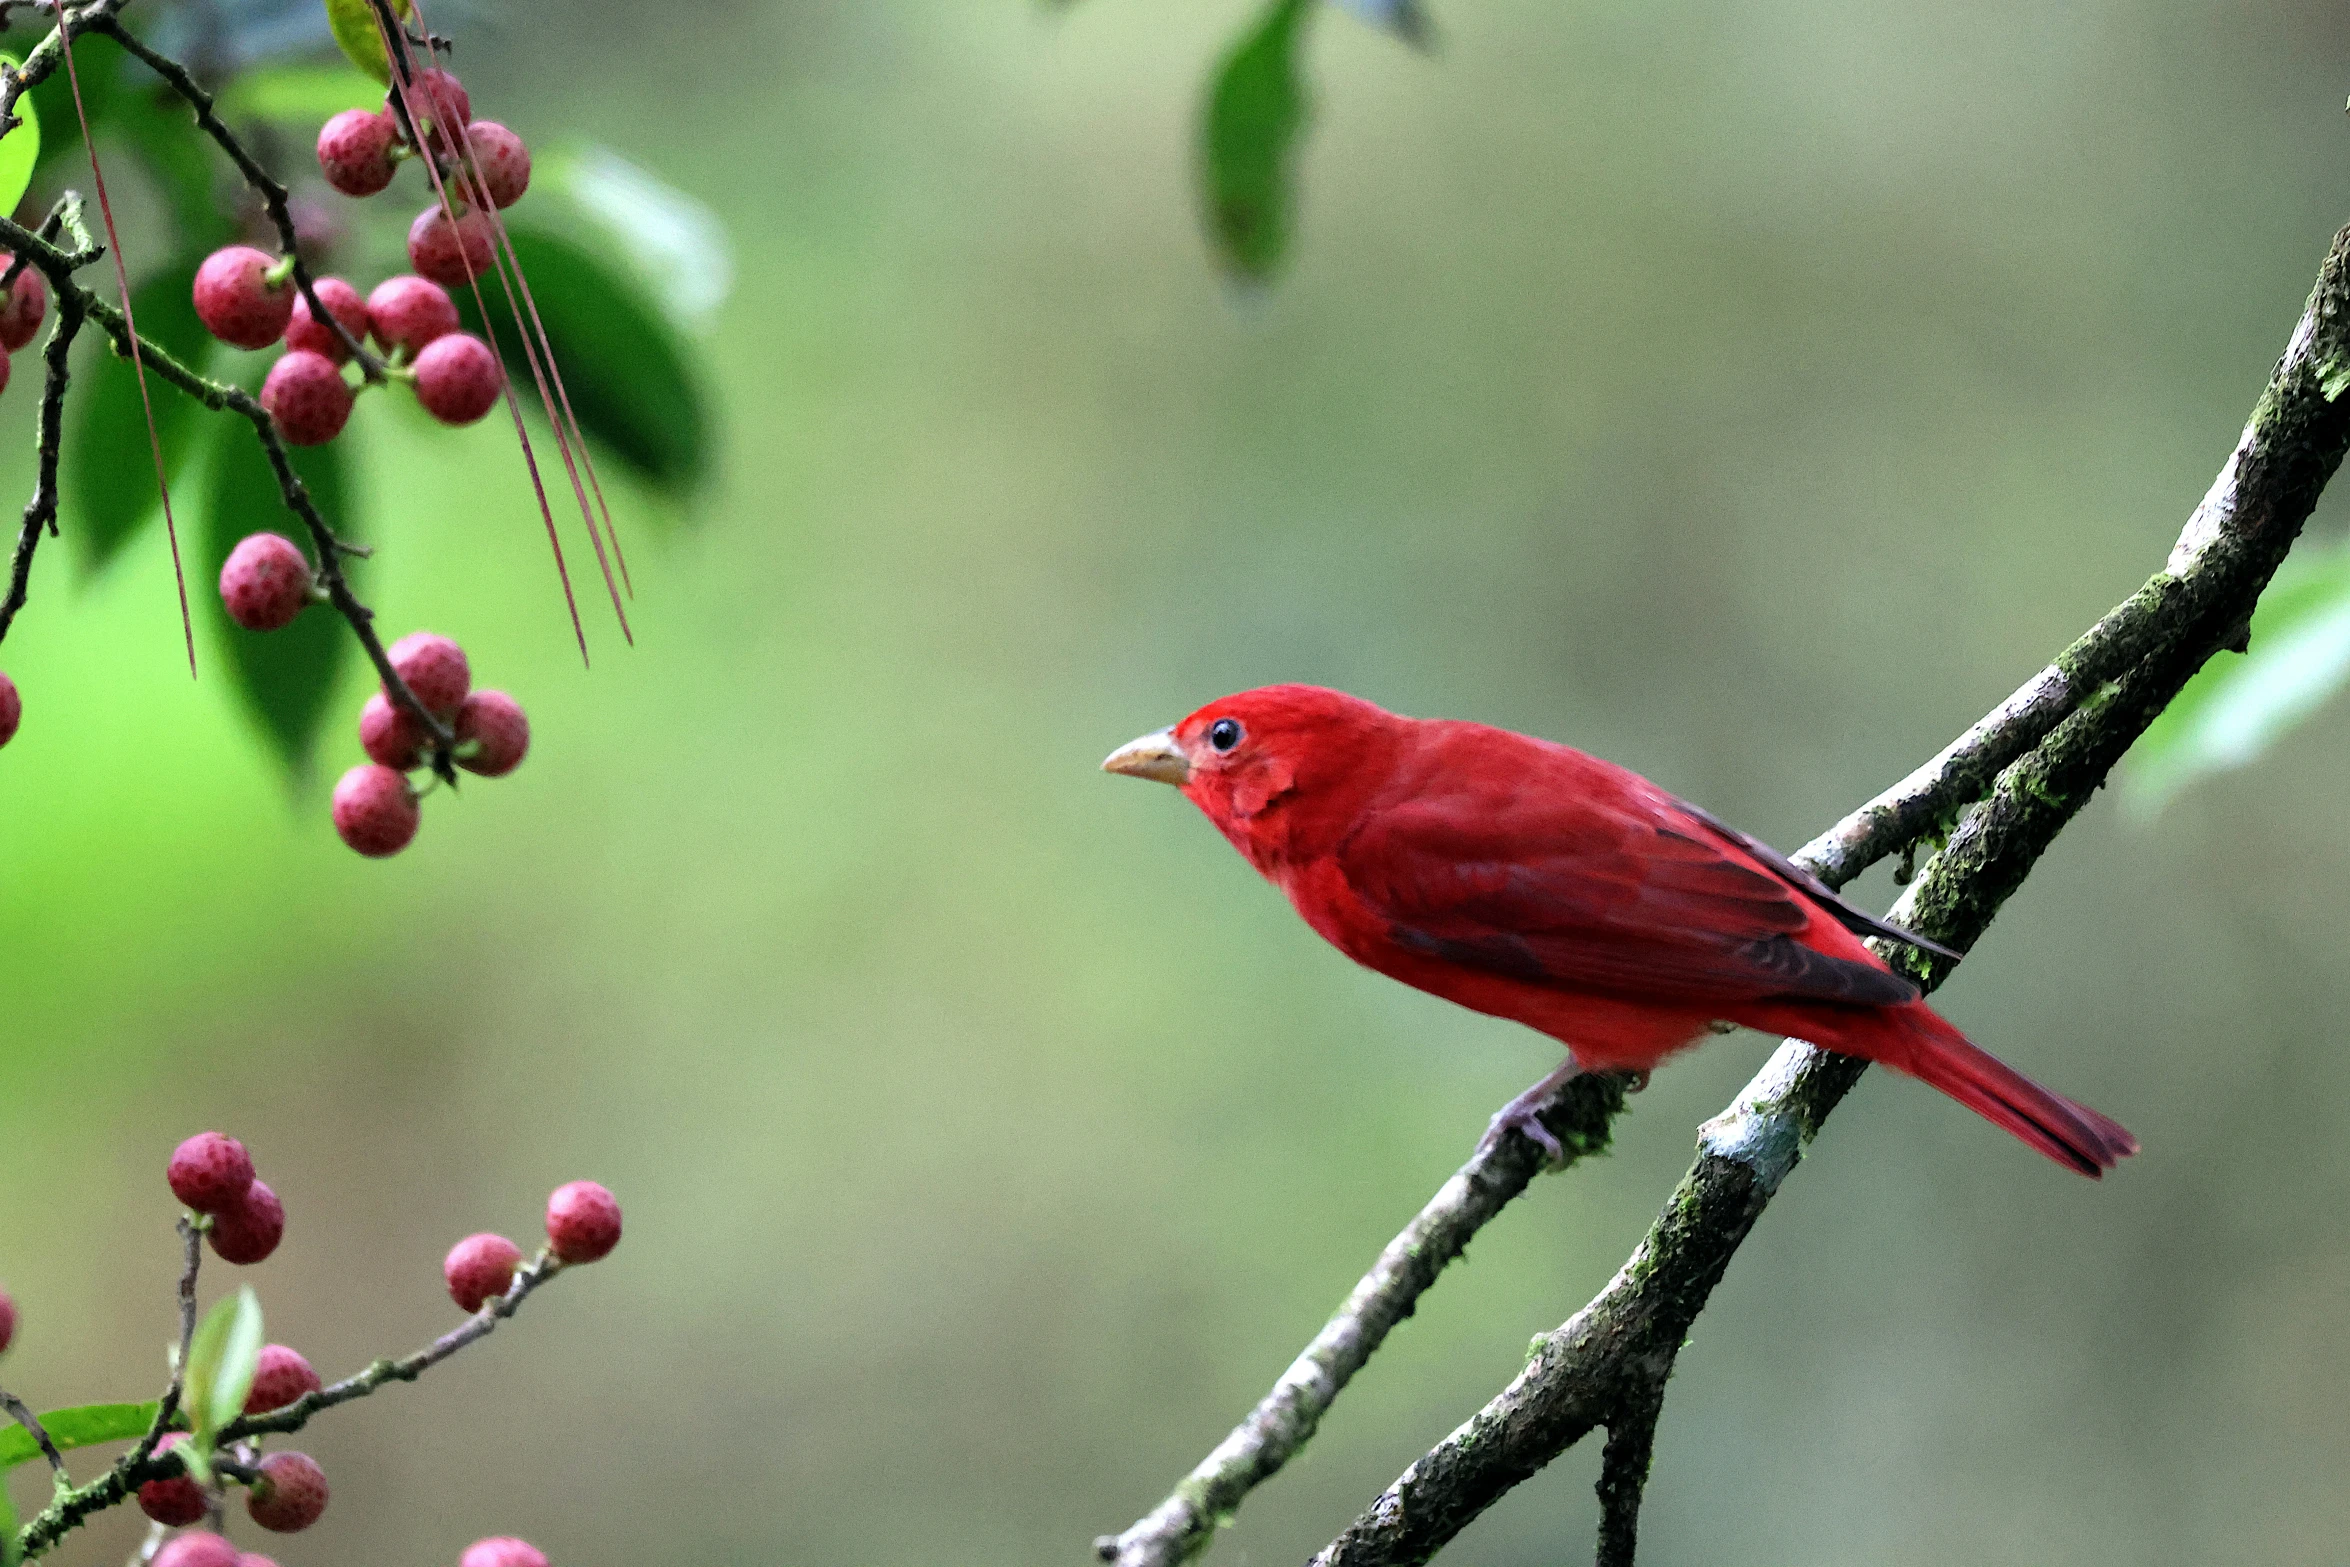 a red bird on a nch of a tree filled with berries